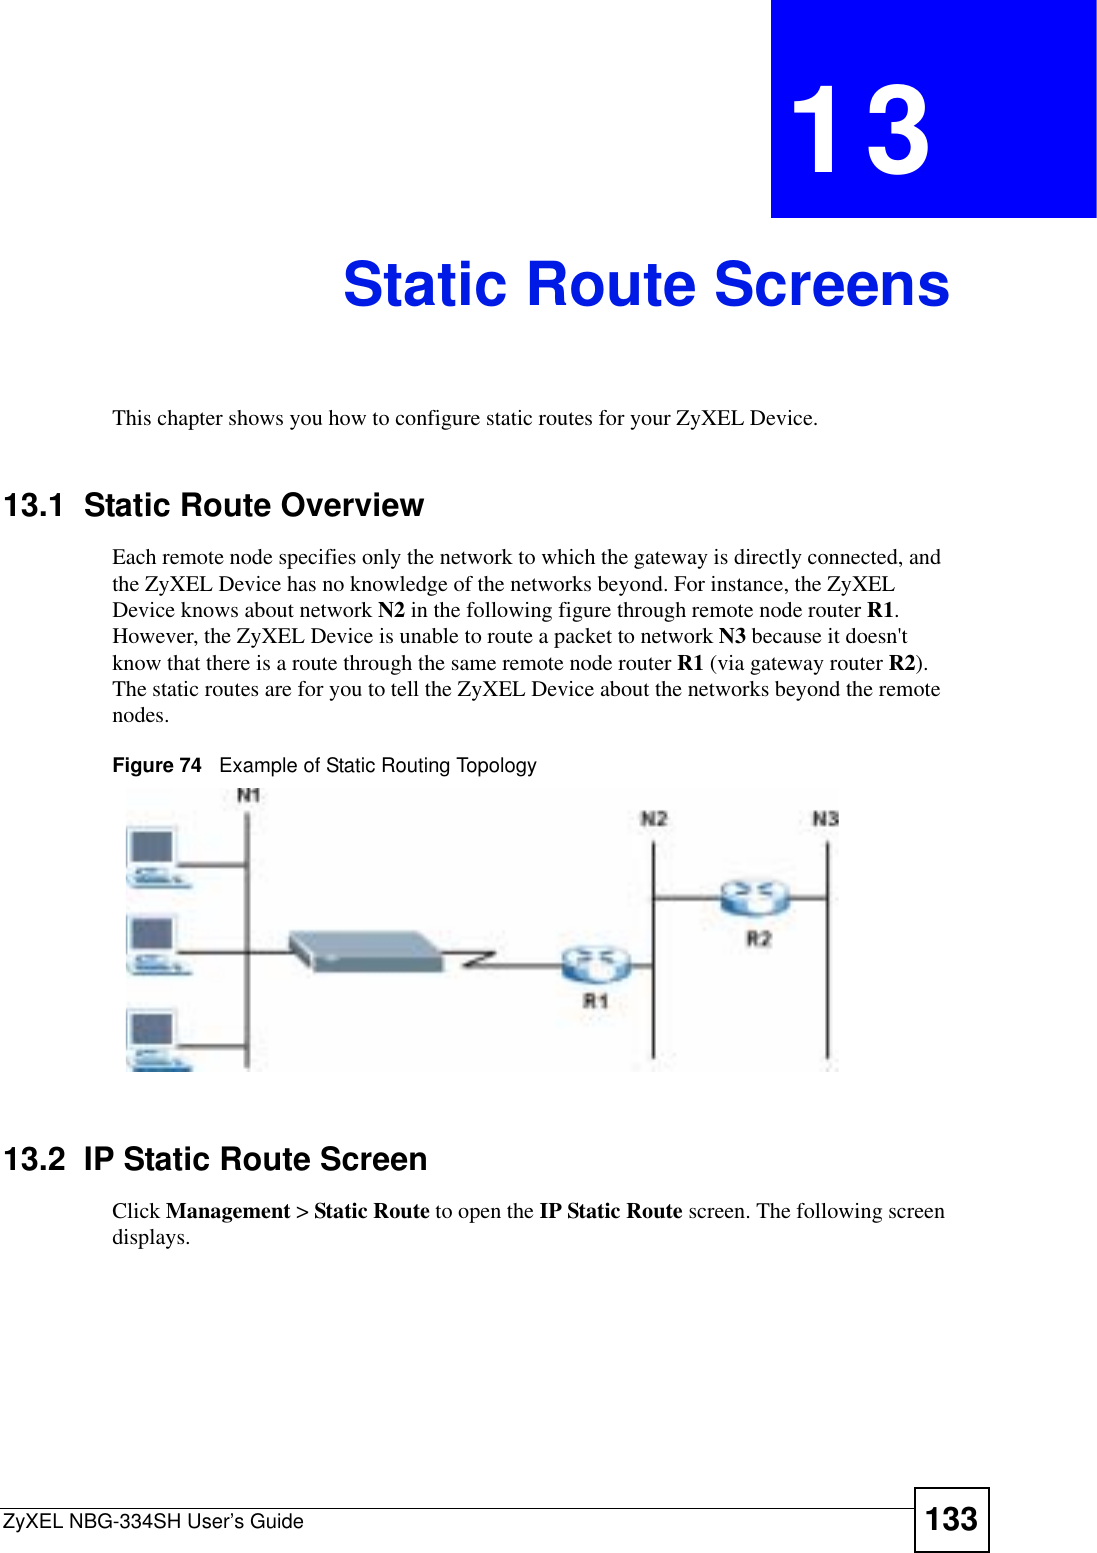 ZyXEL NBG-334SH User’s Guide 133CHAPTER 13Static Route ScreensThis chapter shows you how to configure static routes for your ZyXEL Device.13.1  Static Route OverviewEach remote node specifies only the network to which the gateway is directly connected, and the ZyXEL Device has no knowledge of the networks beyond. For instance, the ZyXEL Device knows about network N2 in the following figure through remote node router R1.However, the ZyXEL Device is unable to route a packet to network N3 because it doesn&apos;t know that there is a route through the same remote node router R1 (via gateway router R2).The static routes are for you to tell the ZyXEL Device about the networks beyond the remote nodes.Figure 74   Example of Static Routing Topology13.2  IP Static Route ScreenClick Management &gt; Static Route to open the IP Static Route screen. The following screen displays.